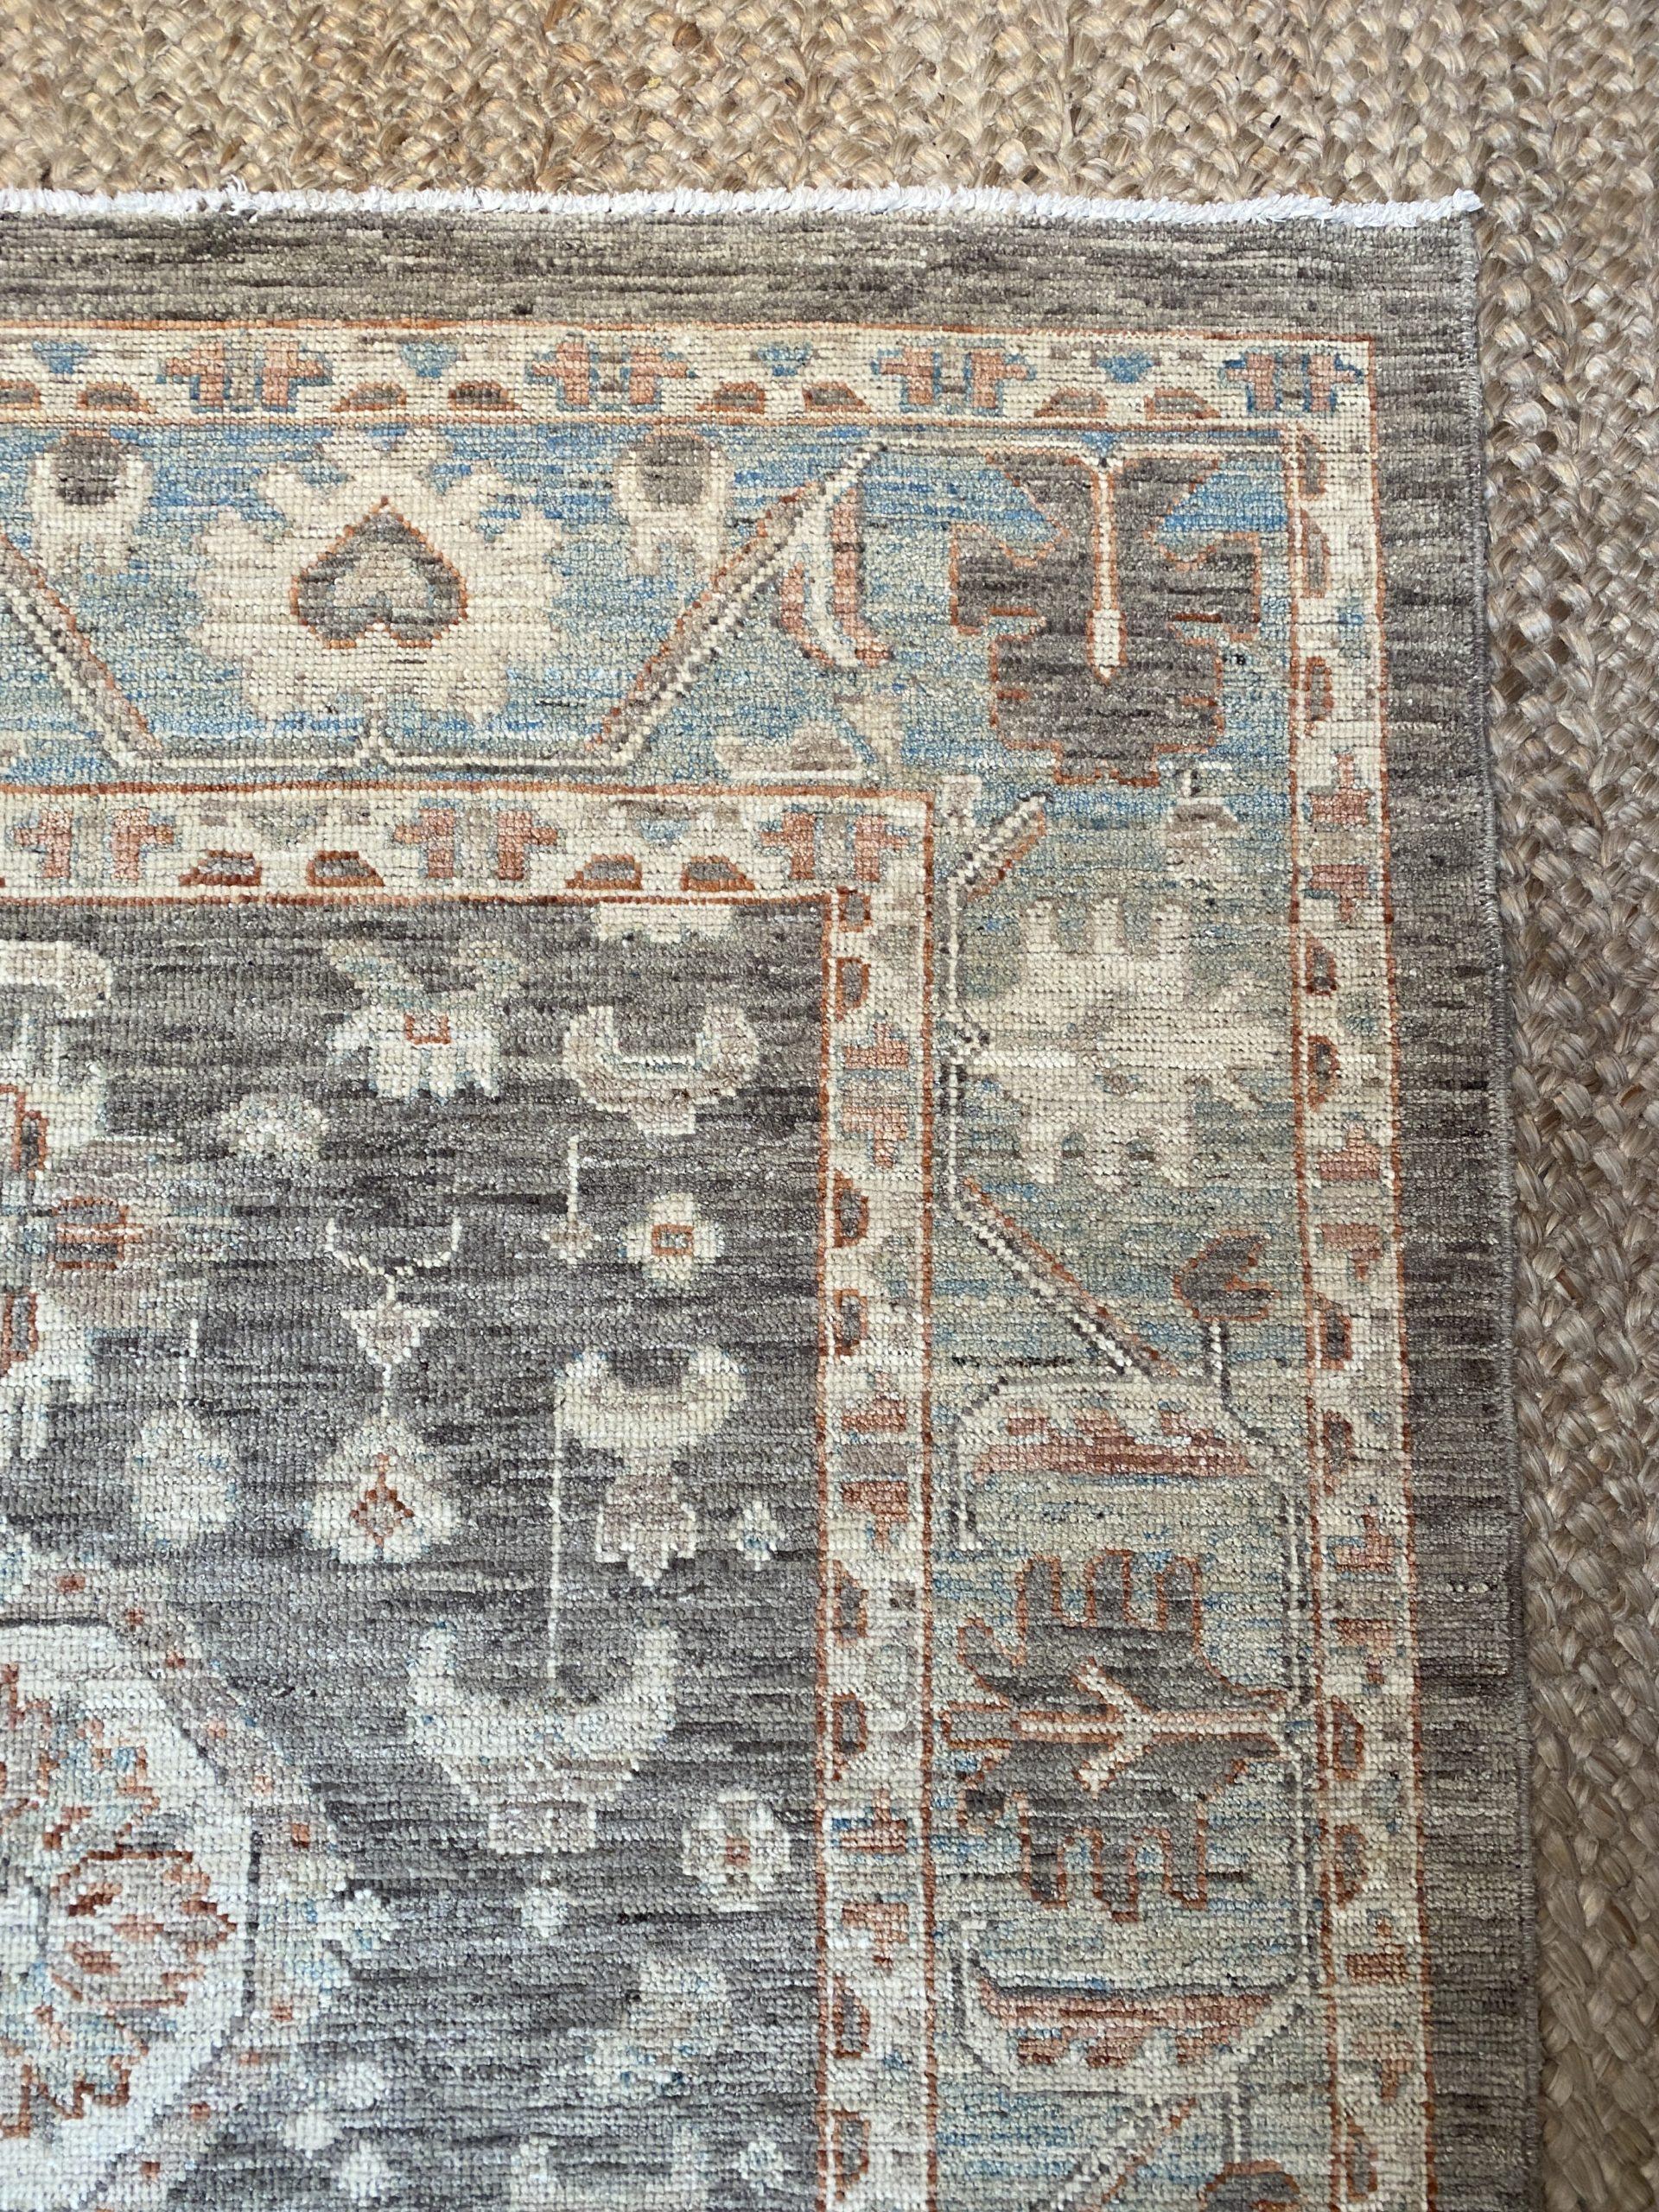 Orgin: Afghanistan
Dimensions: 13’7? x 10’8?
Age: 1920’s
Design: Anatolian
Material: 100% Wool-pile
Color: Grey, Light Blue, Rust, Beige

14330.